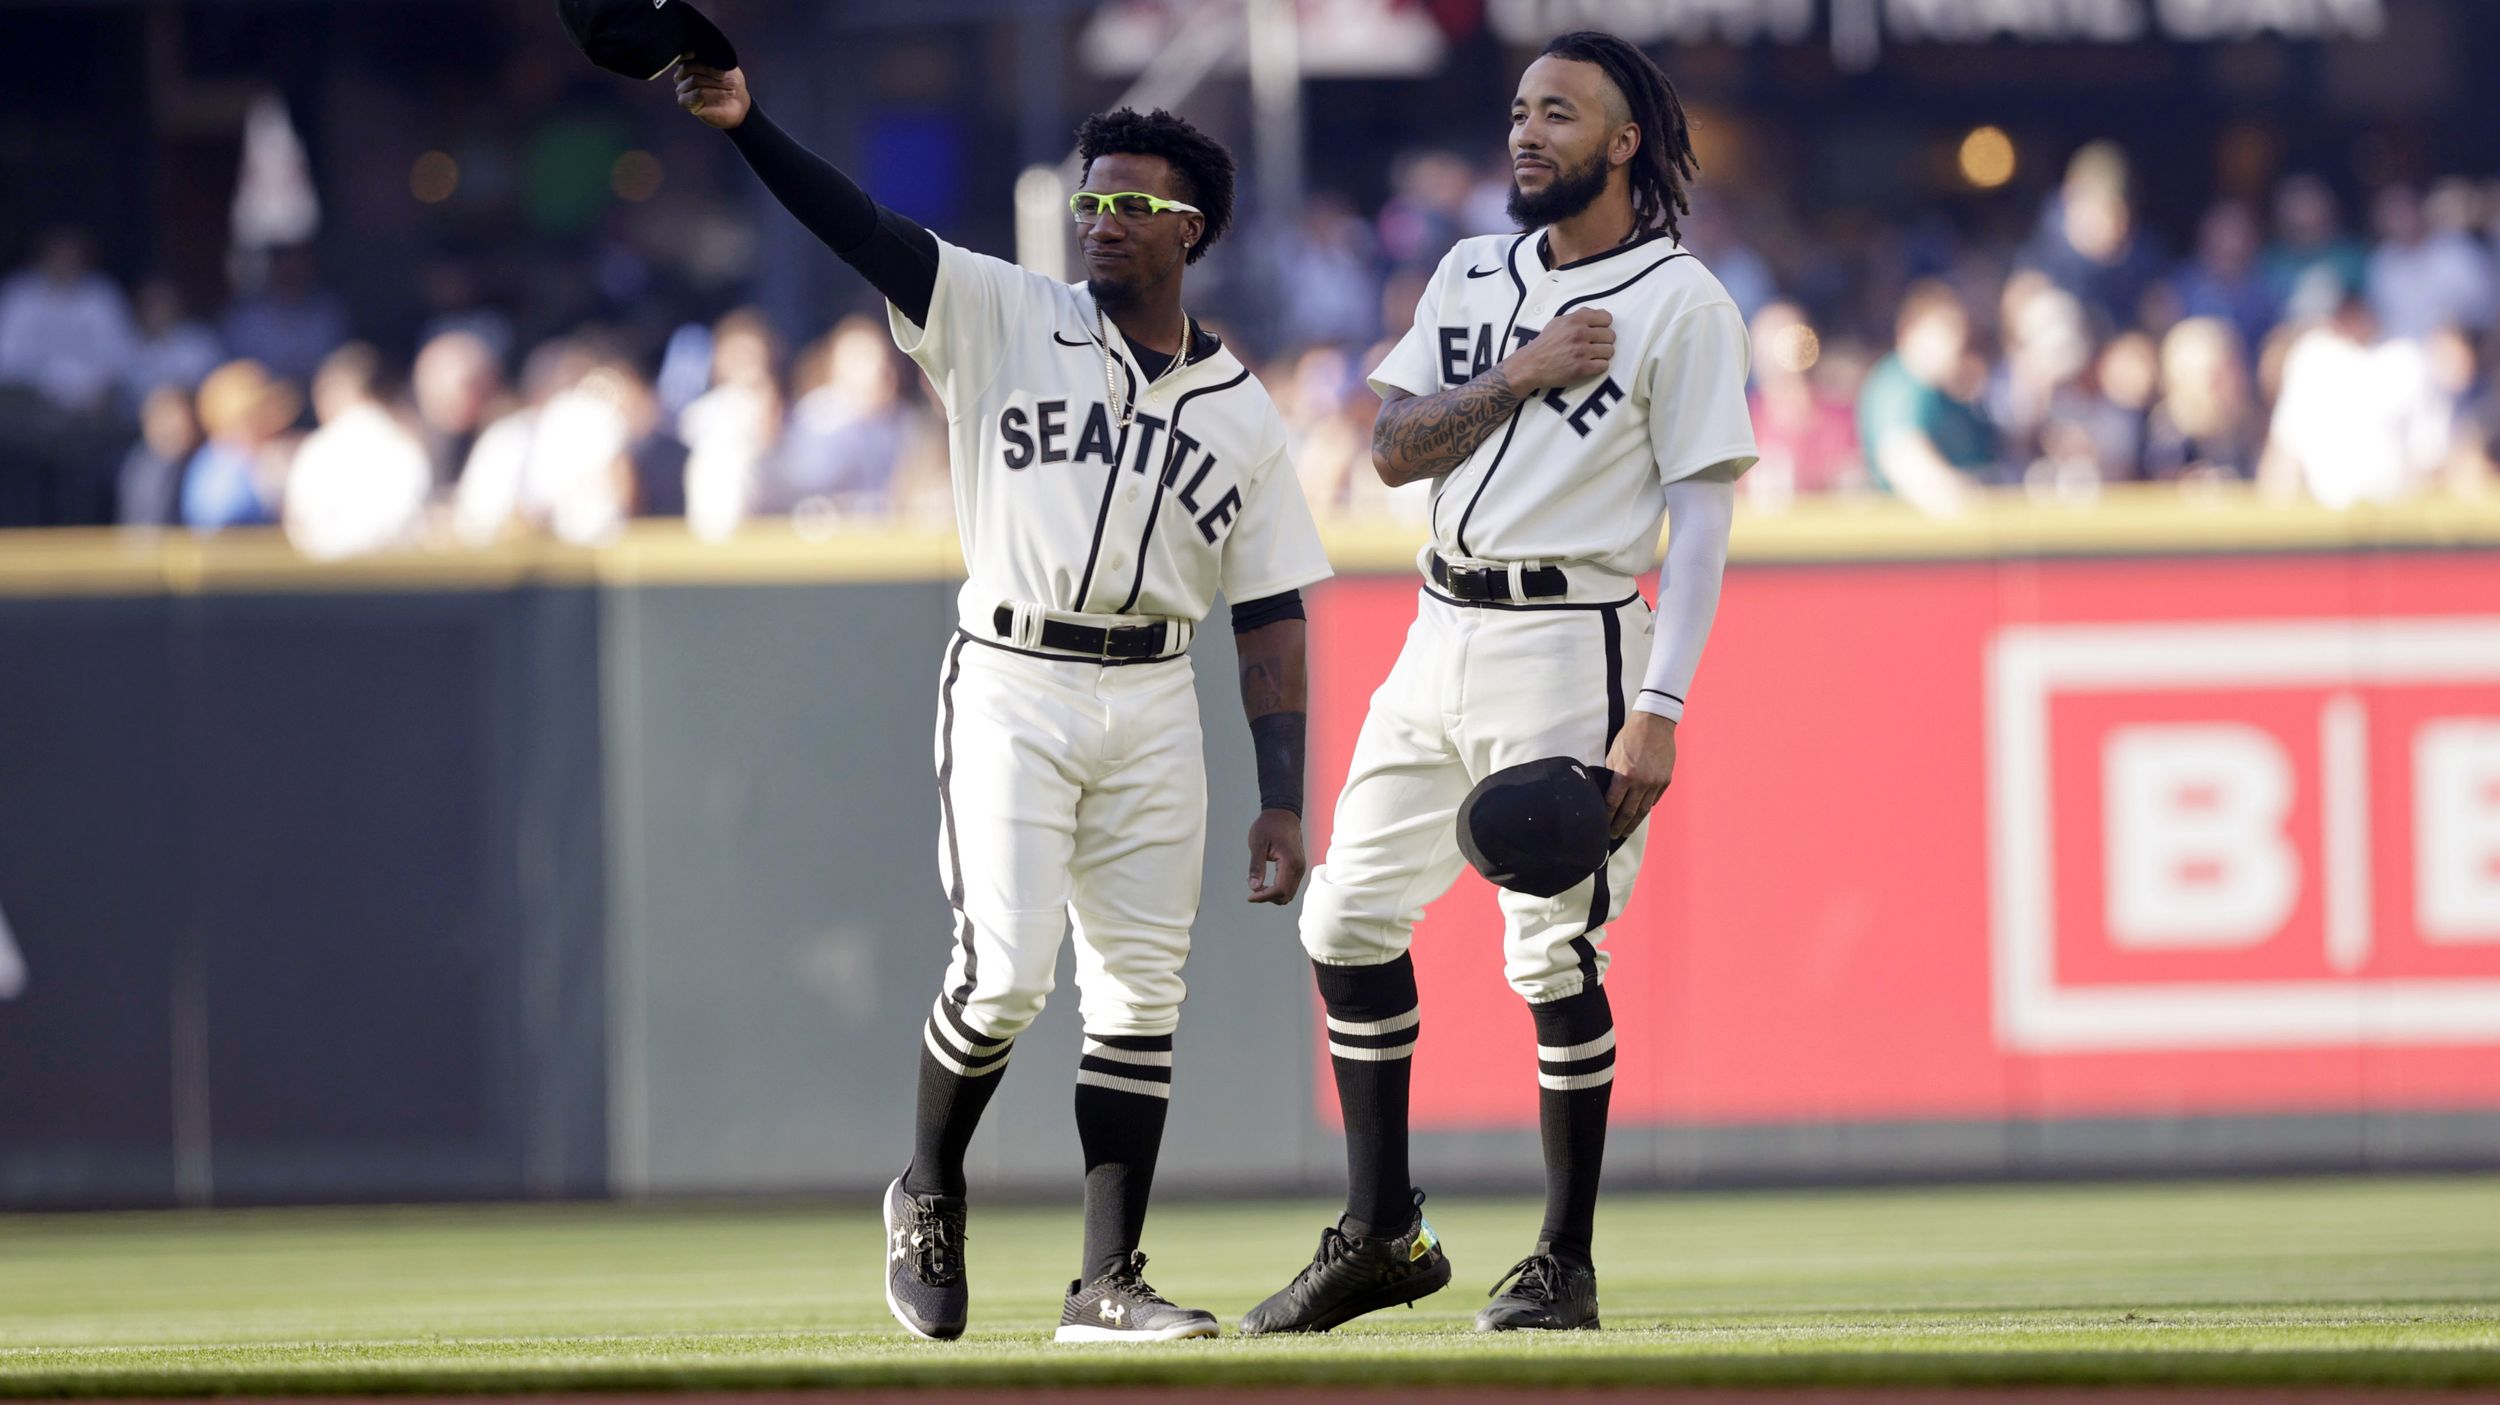 Seattle Mariners honor the Negro Leagues with Seattle Steelheads